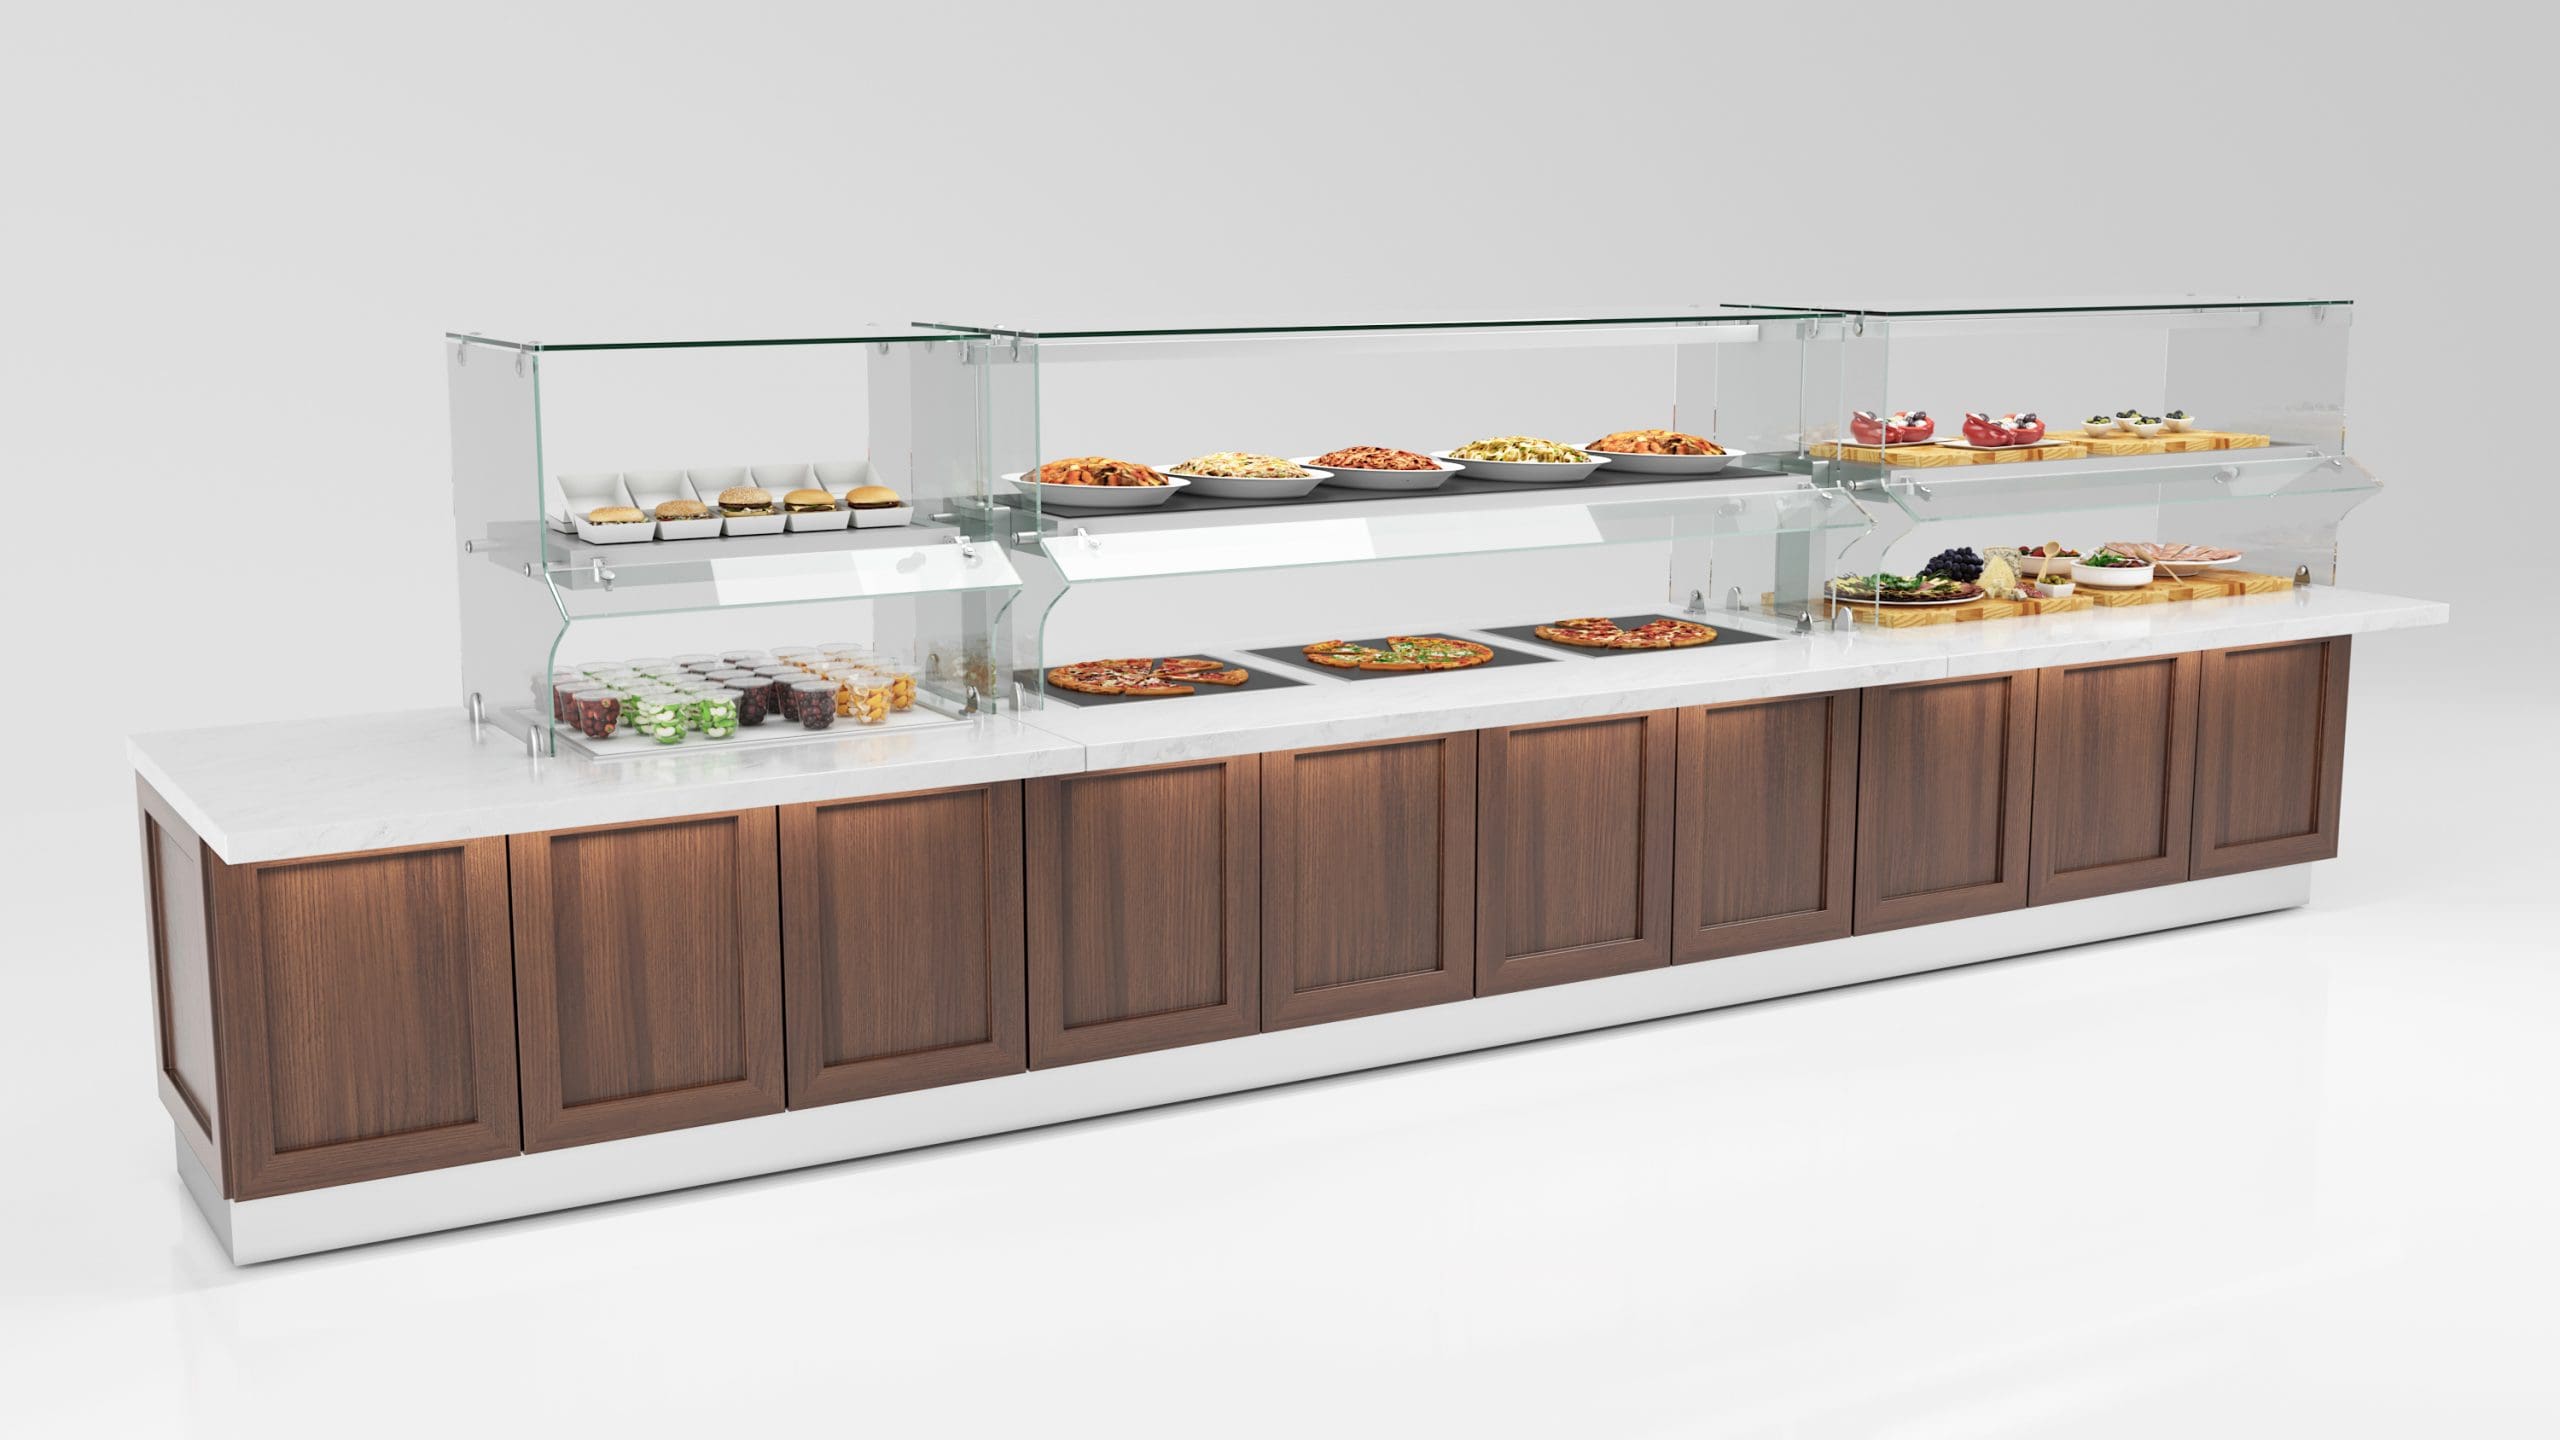 Deciding between modular and one-piece custom serving counters